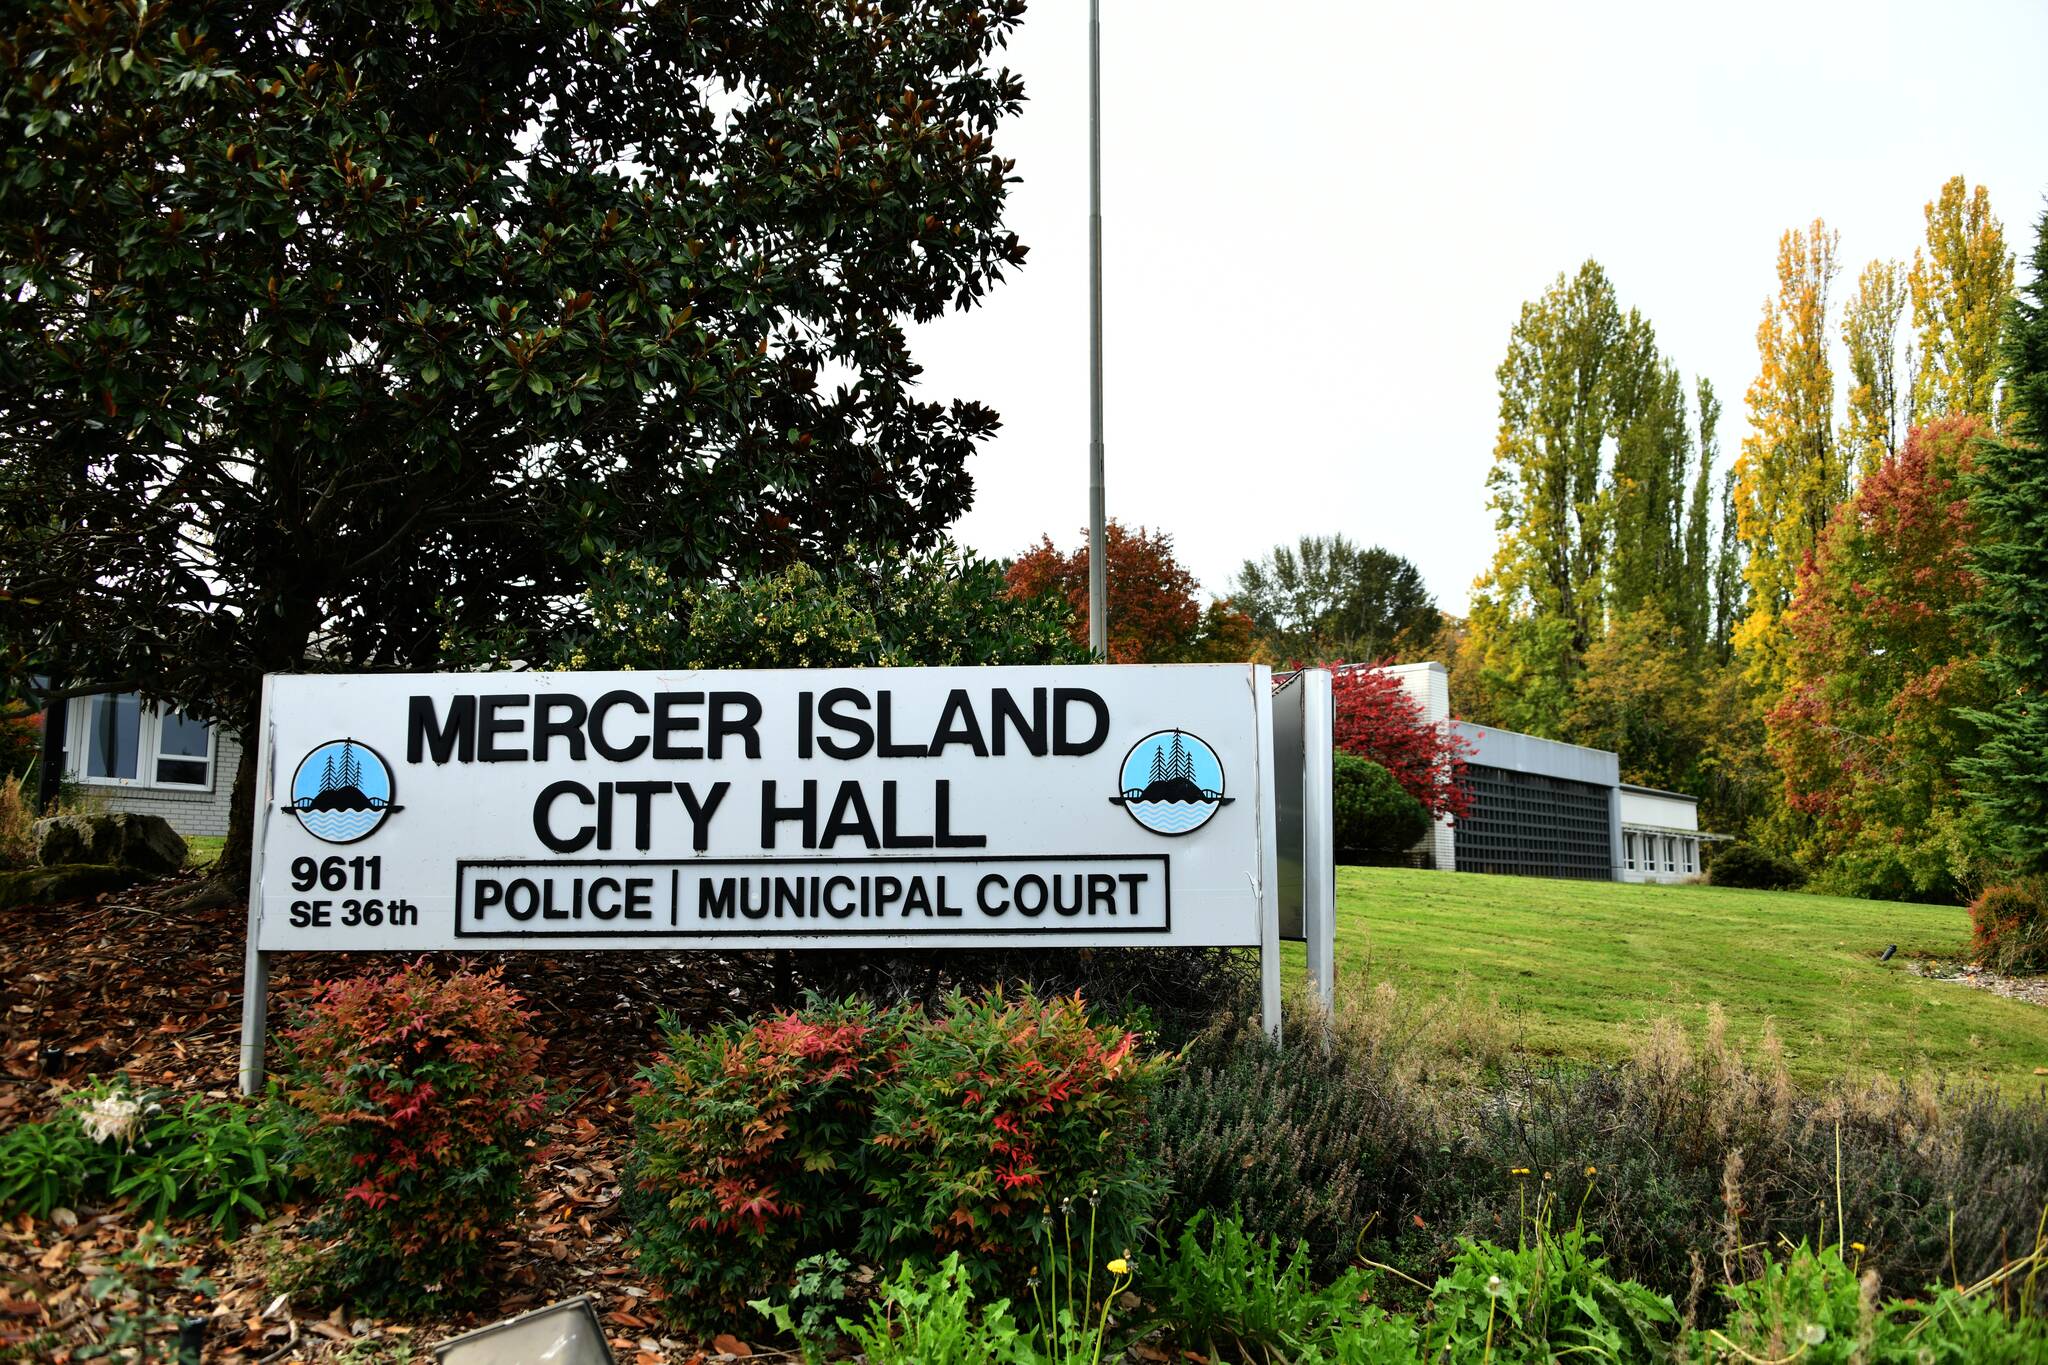 City council meeting set for Sept. 20